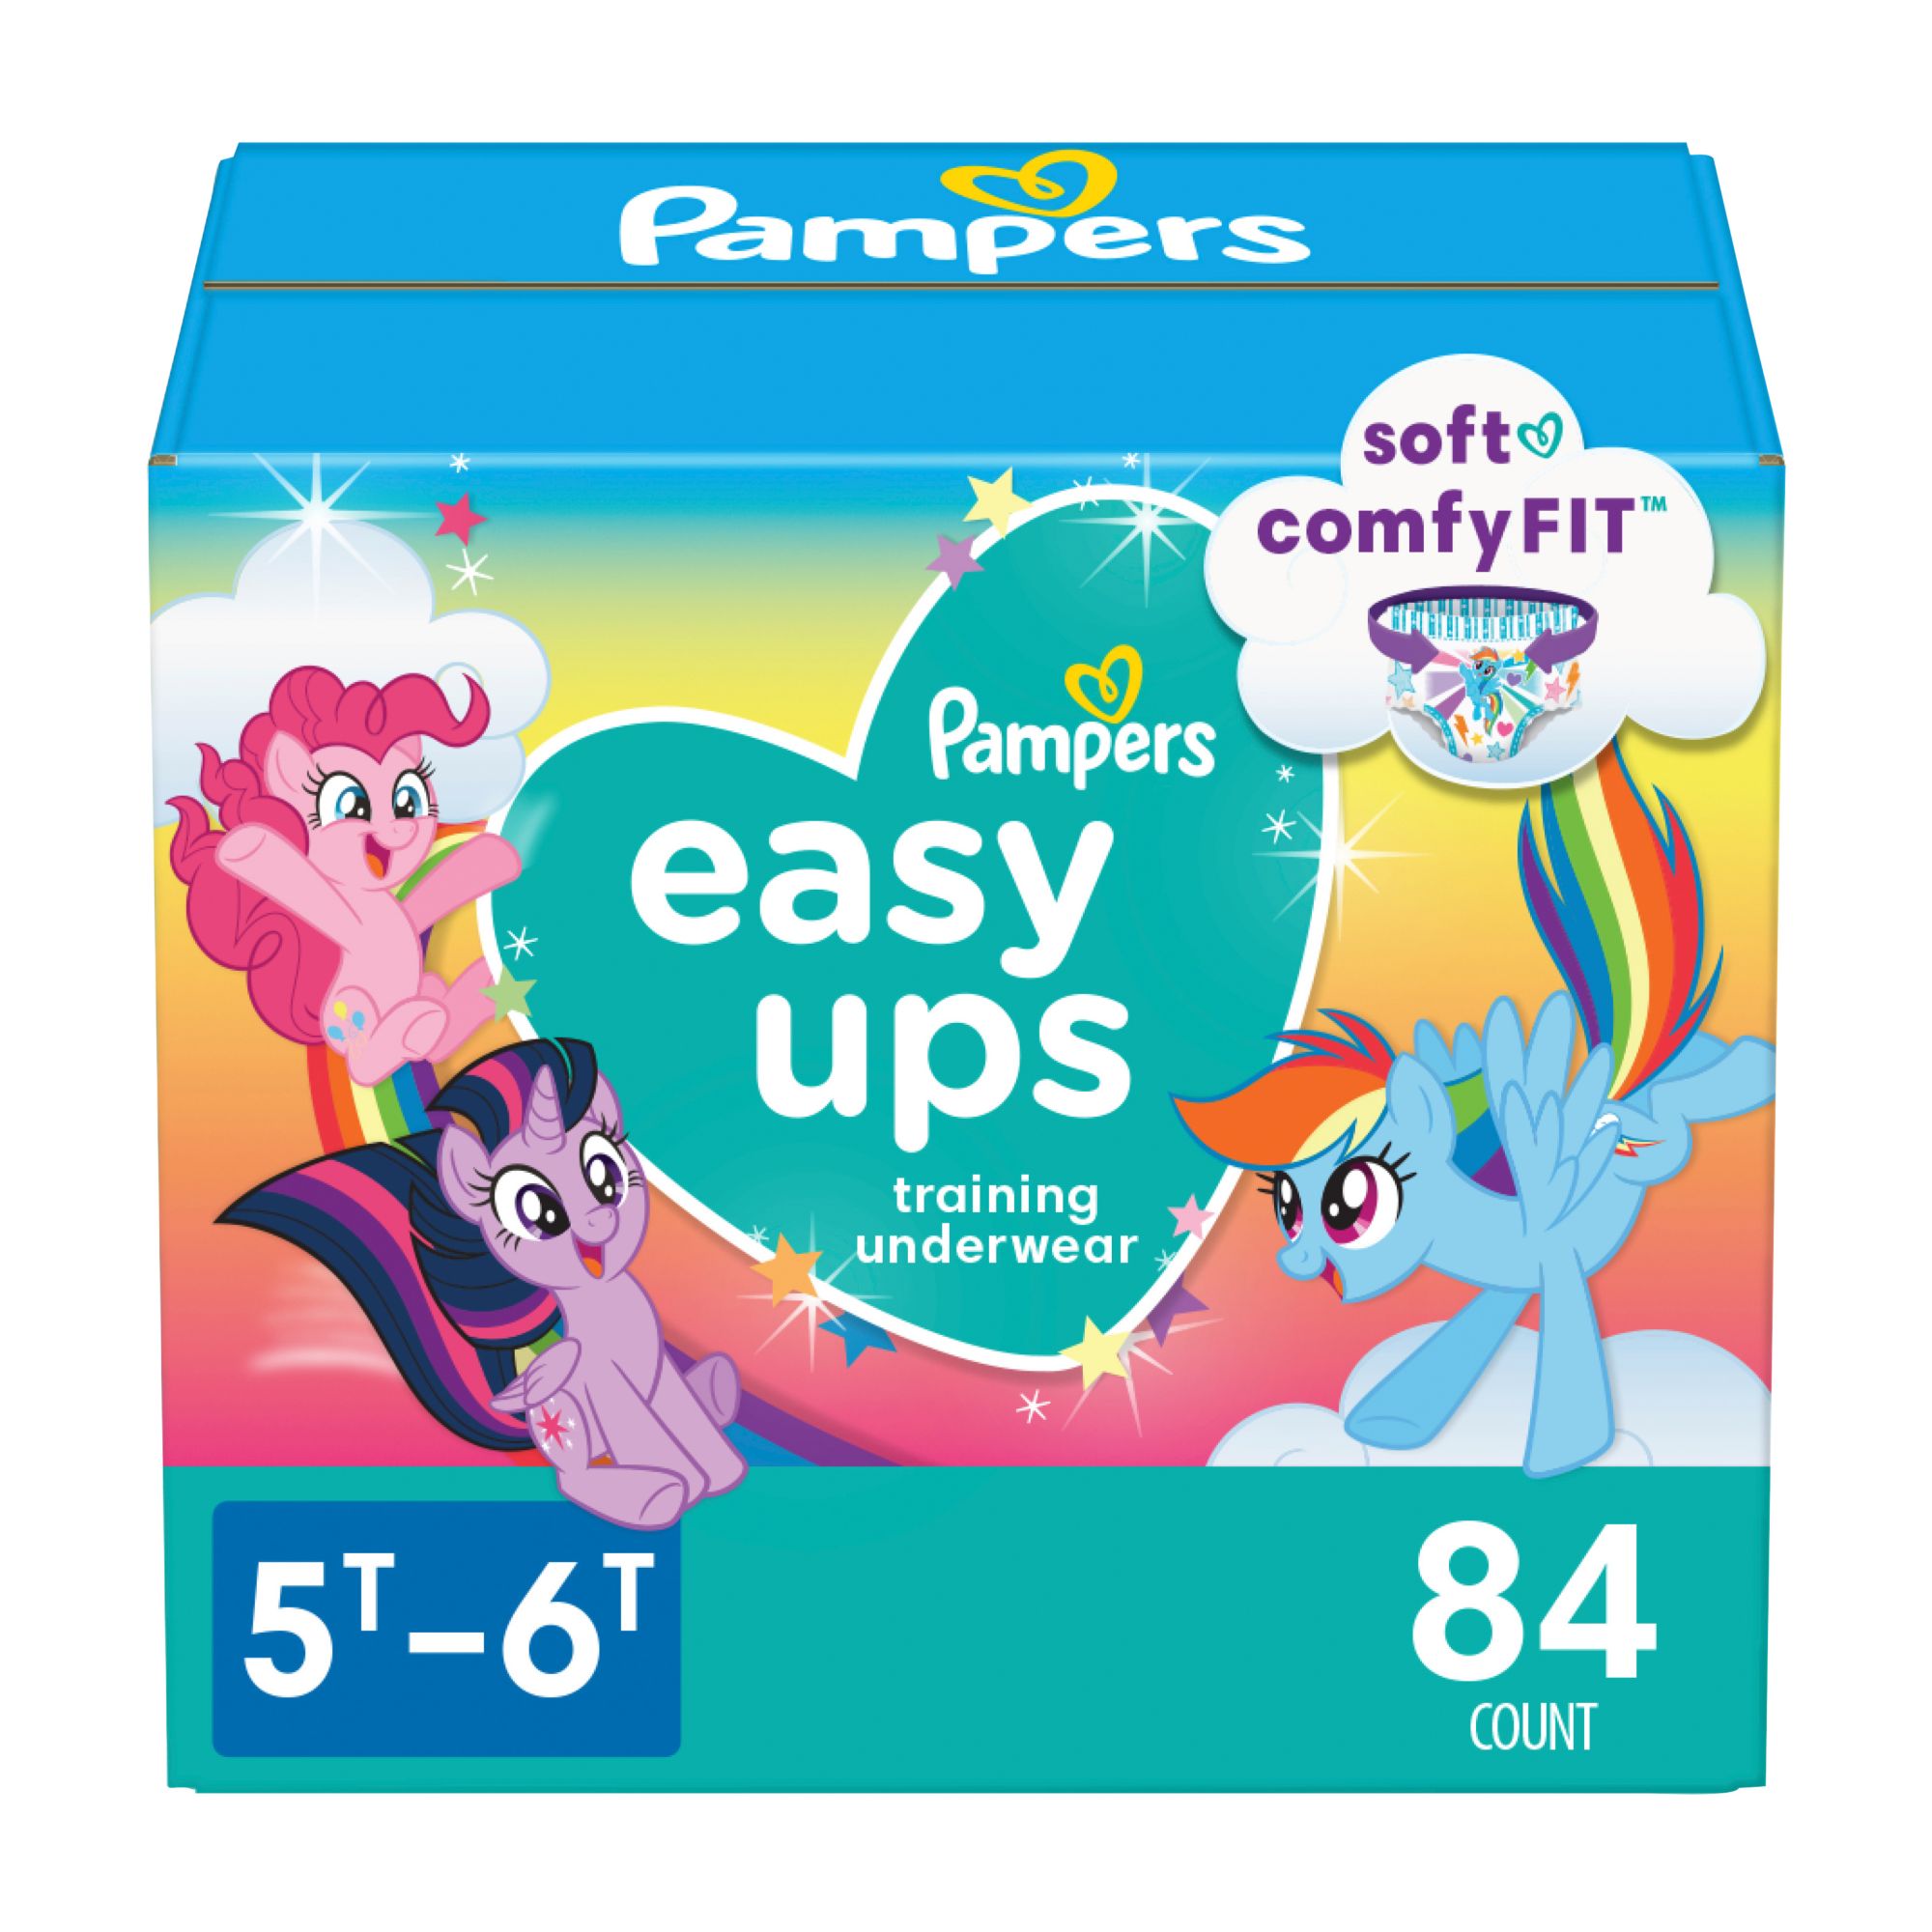 Pampers Easy Ups Training Underwear for Girls, 5T-6T (84 ct.)